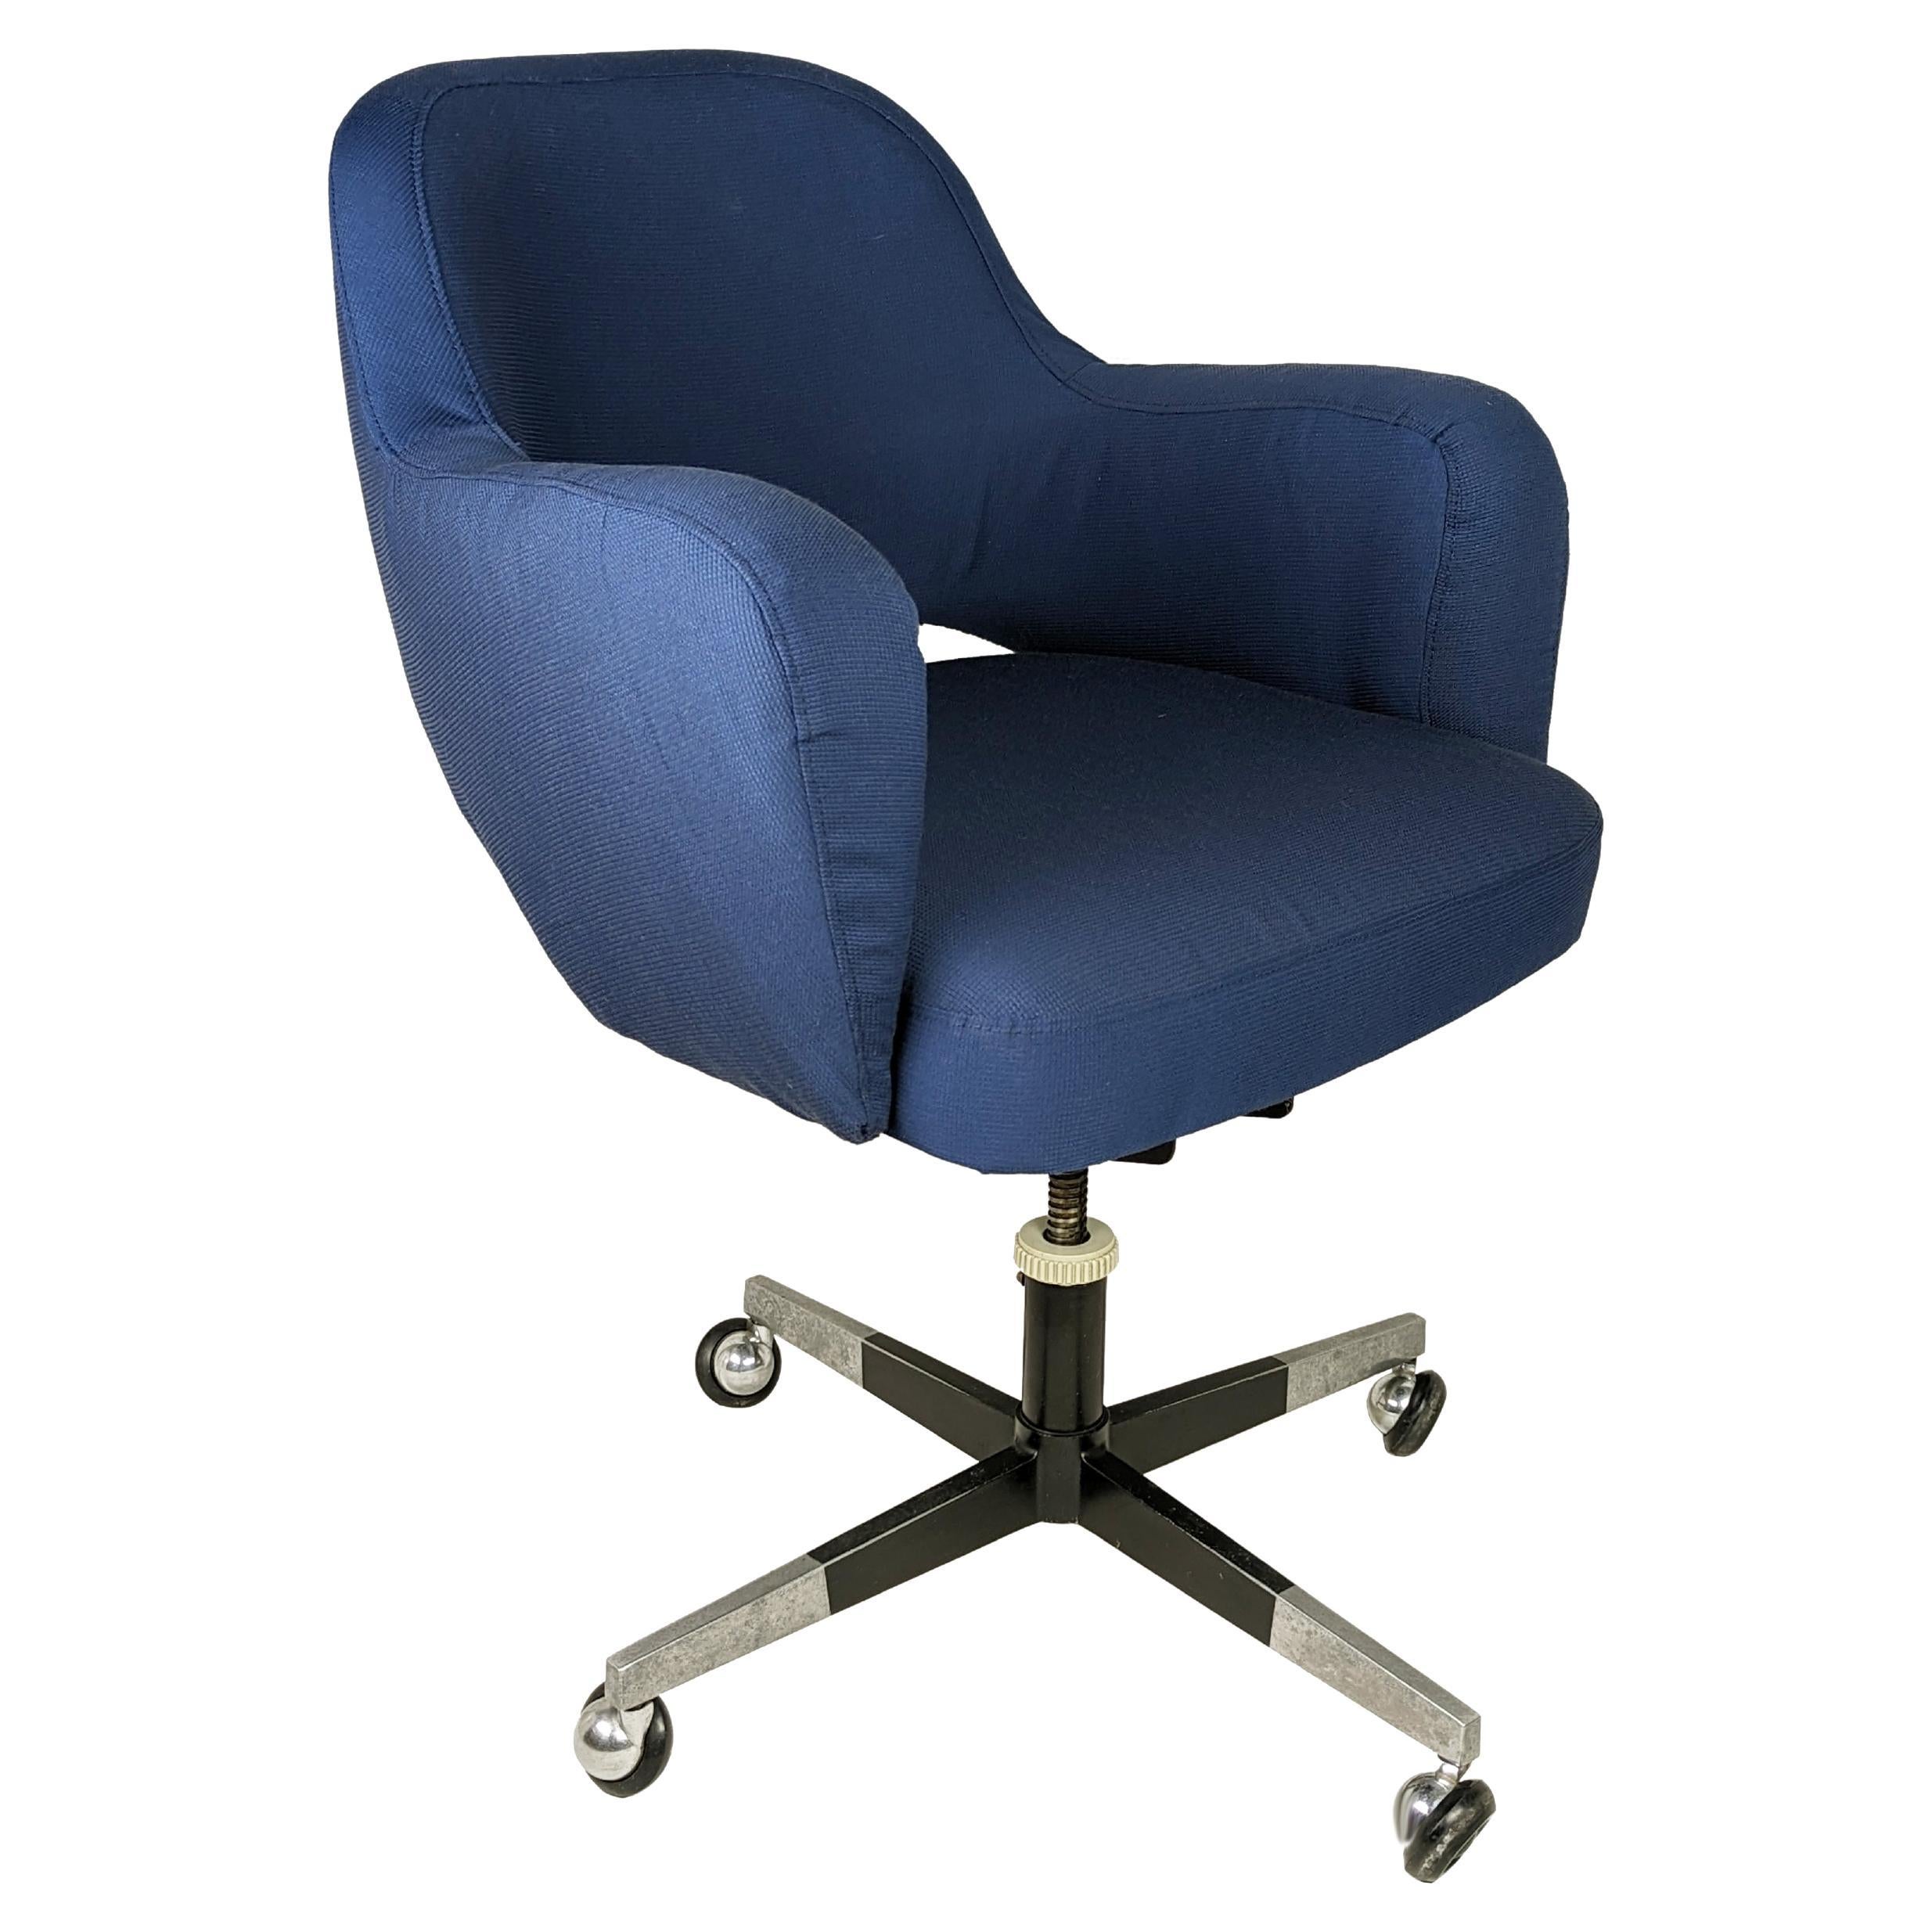 Italian blue fabric and Metal Wheeled Office Chair, 1960-70s For Sale